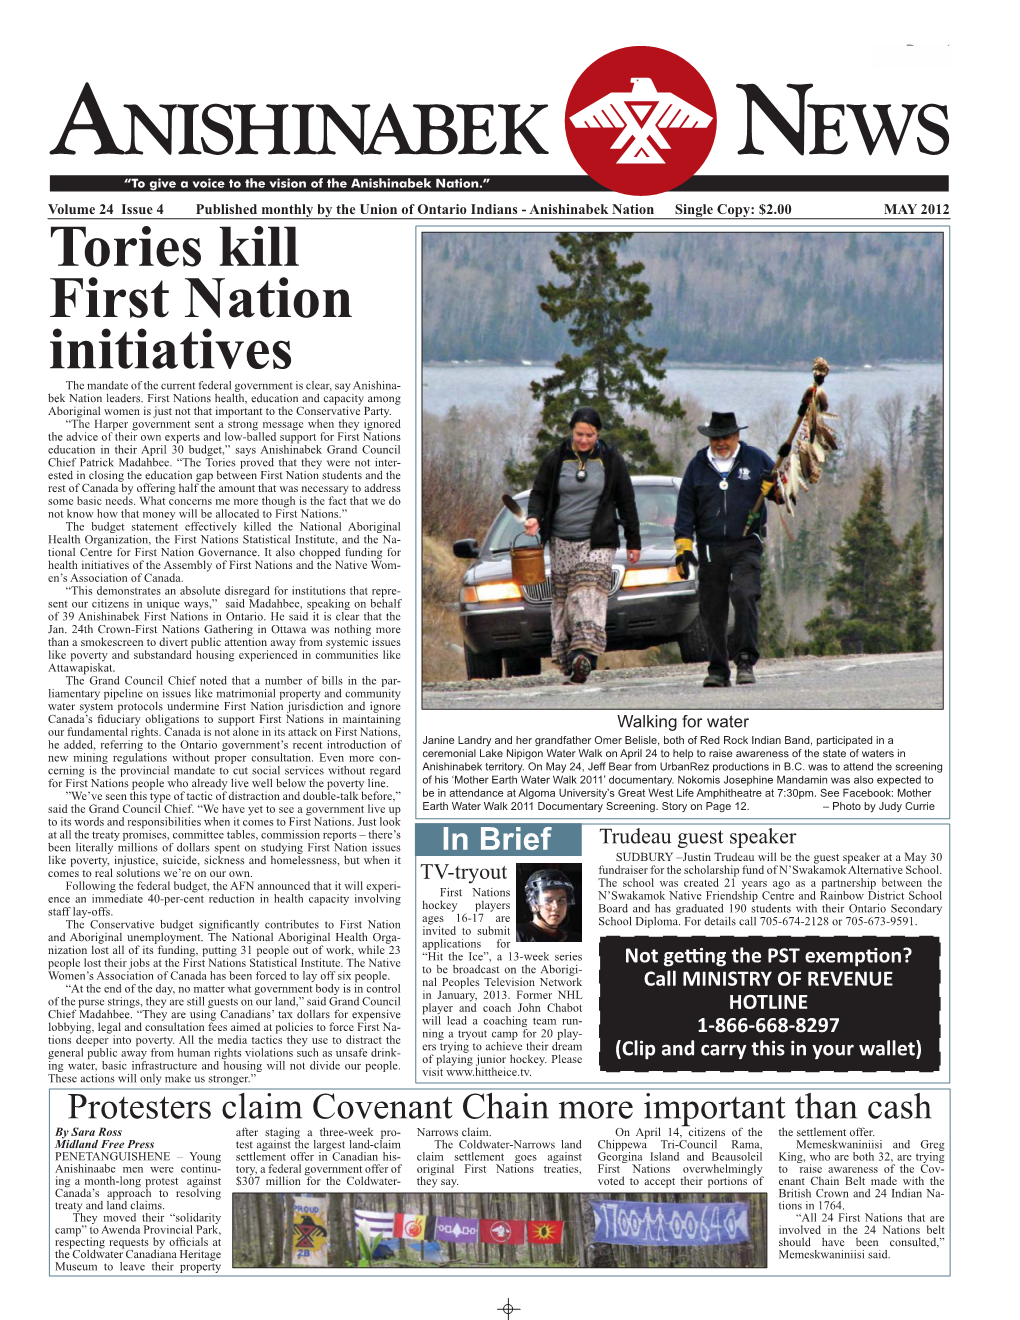 MAY 2012 Tories Kill First Nation Initiatives the Mandate of the Current Federal Government Is Clear, Say Anishina- Bek Nation Leaders